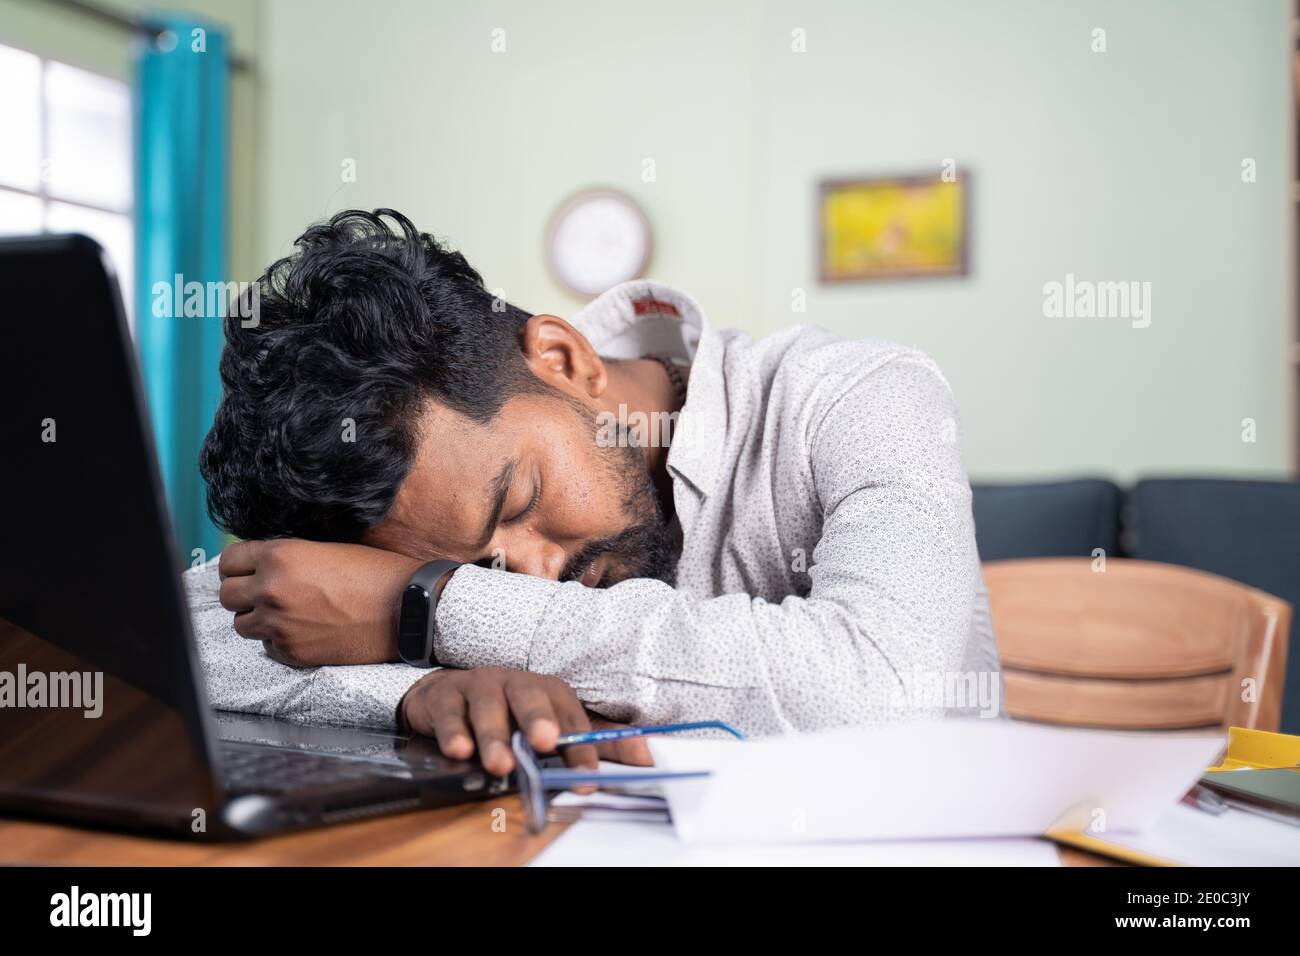 Young man got tired of working and slept on desk - Exhausted millennial fall asleep after after reading on laptop - Concept of napping at workplace Stock Photo